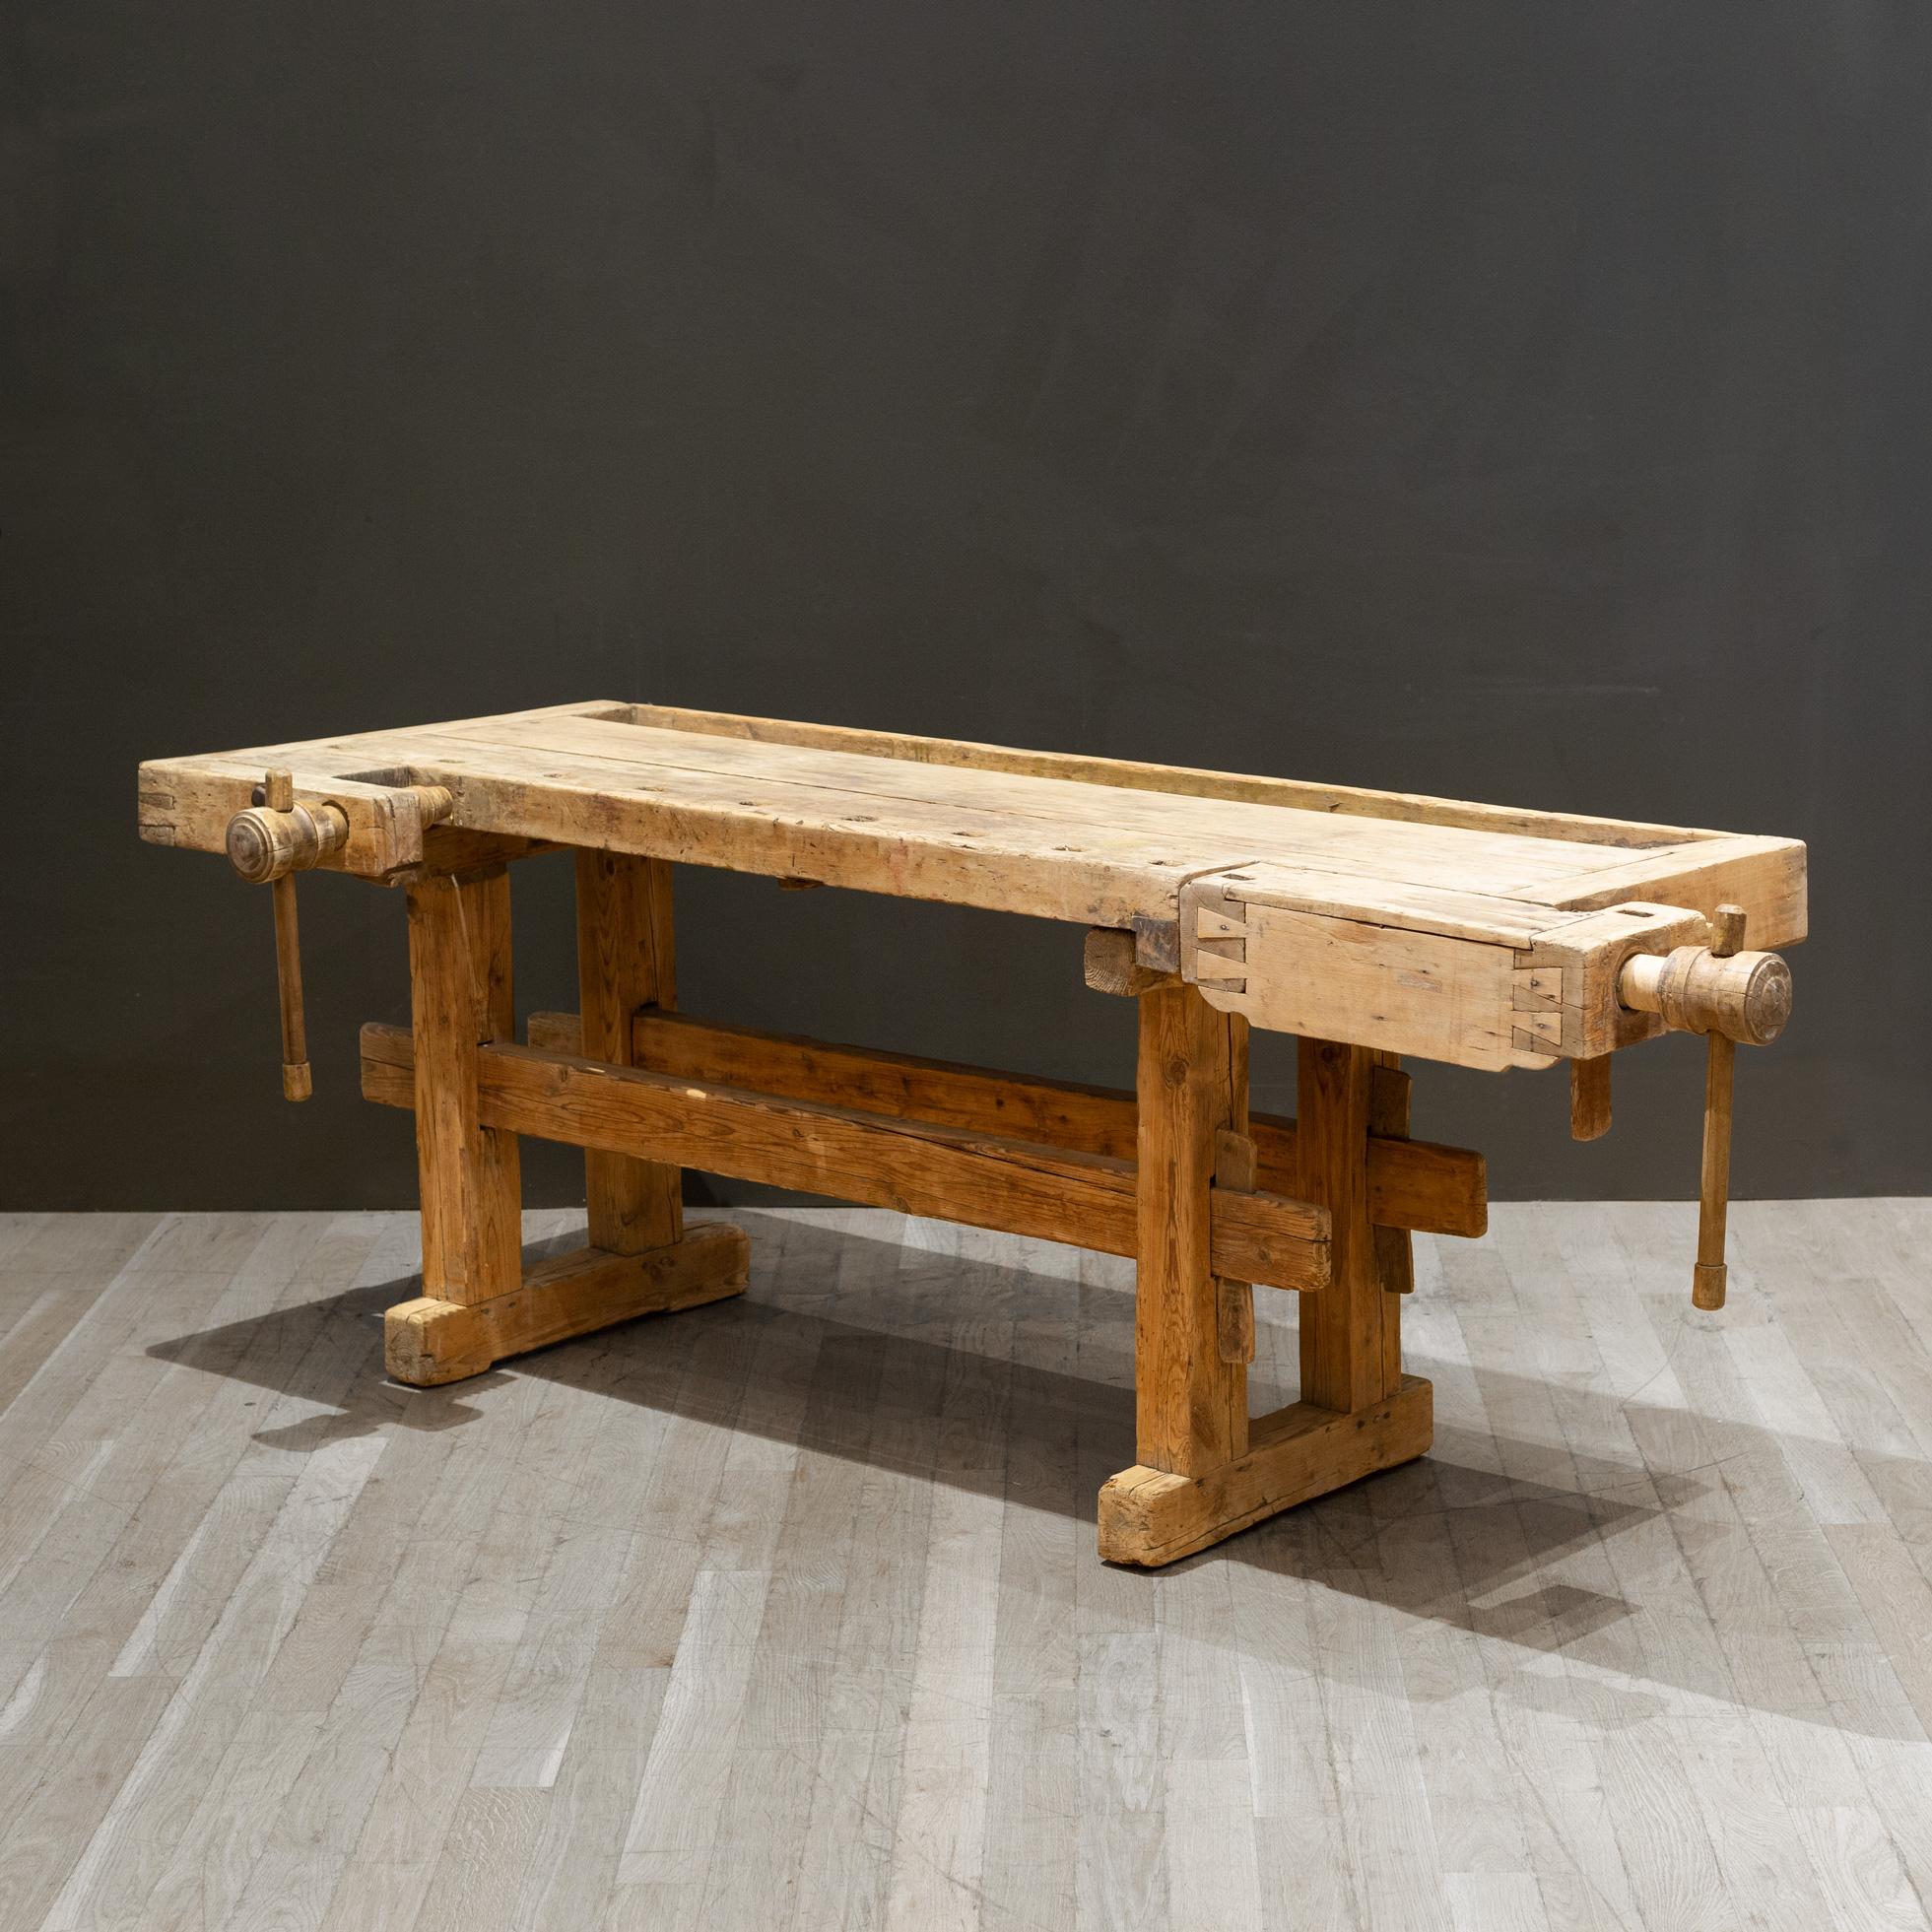 Industrial Late 19th c. Scrubbed Carpenter's Workbench c.1880-1900 For Sale